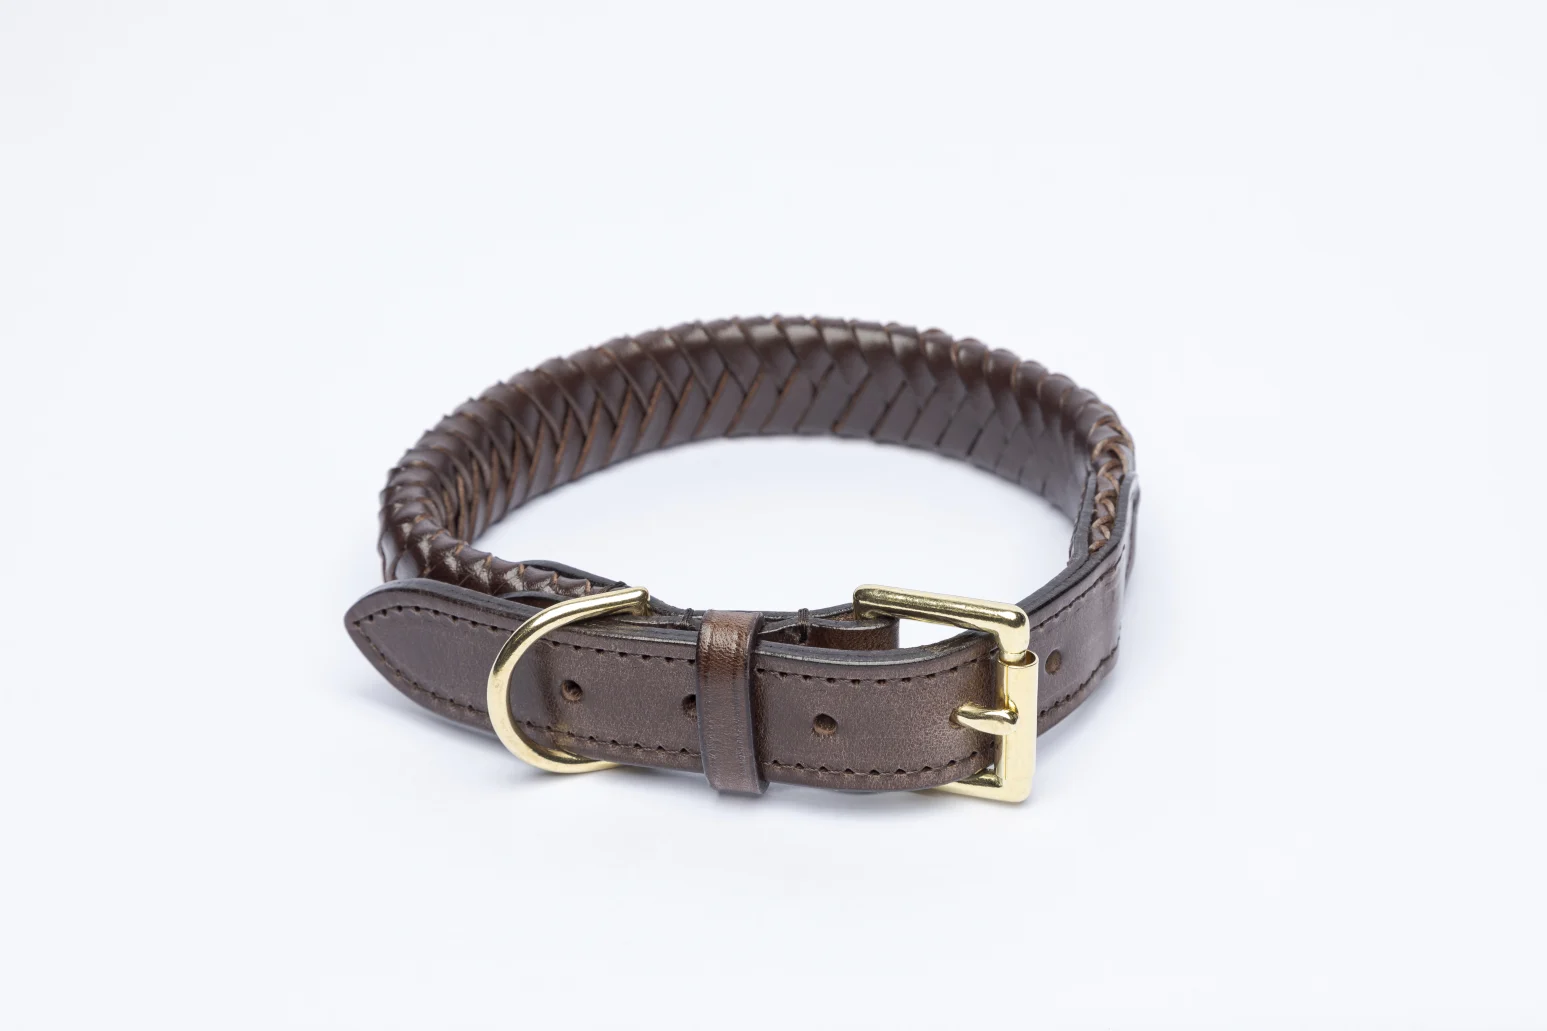 Plaited Dog Collar in Vegetable Tan Leather in Dark Brown coiled